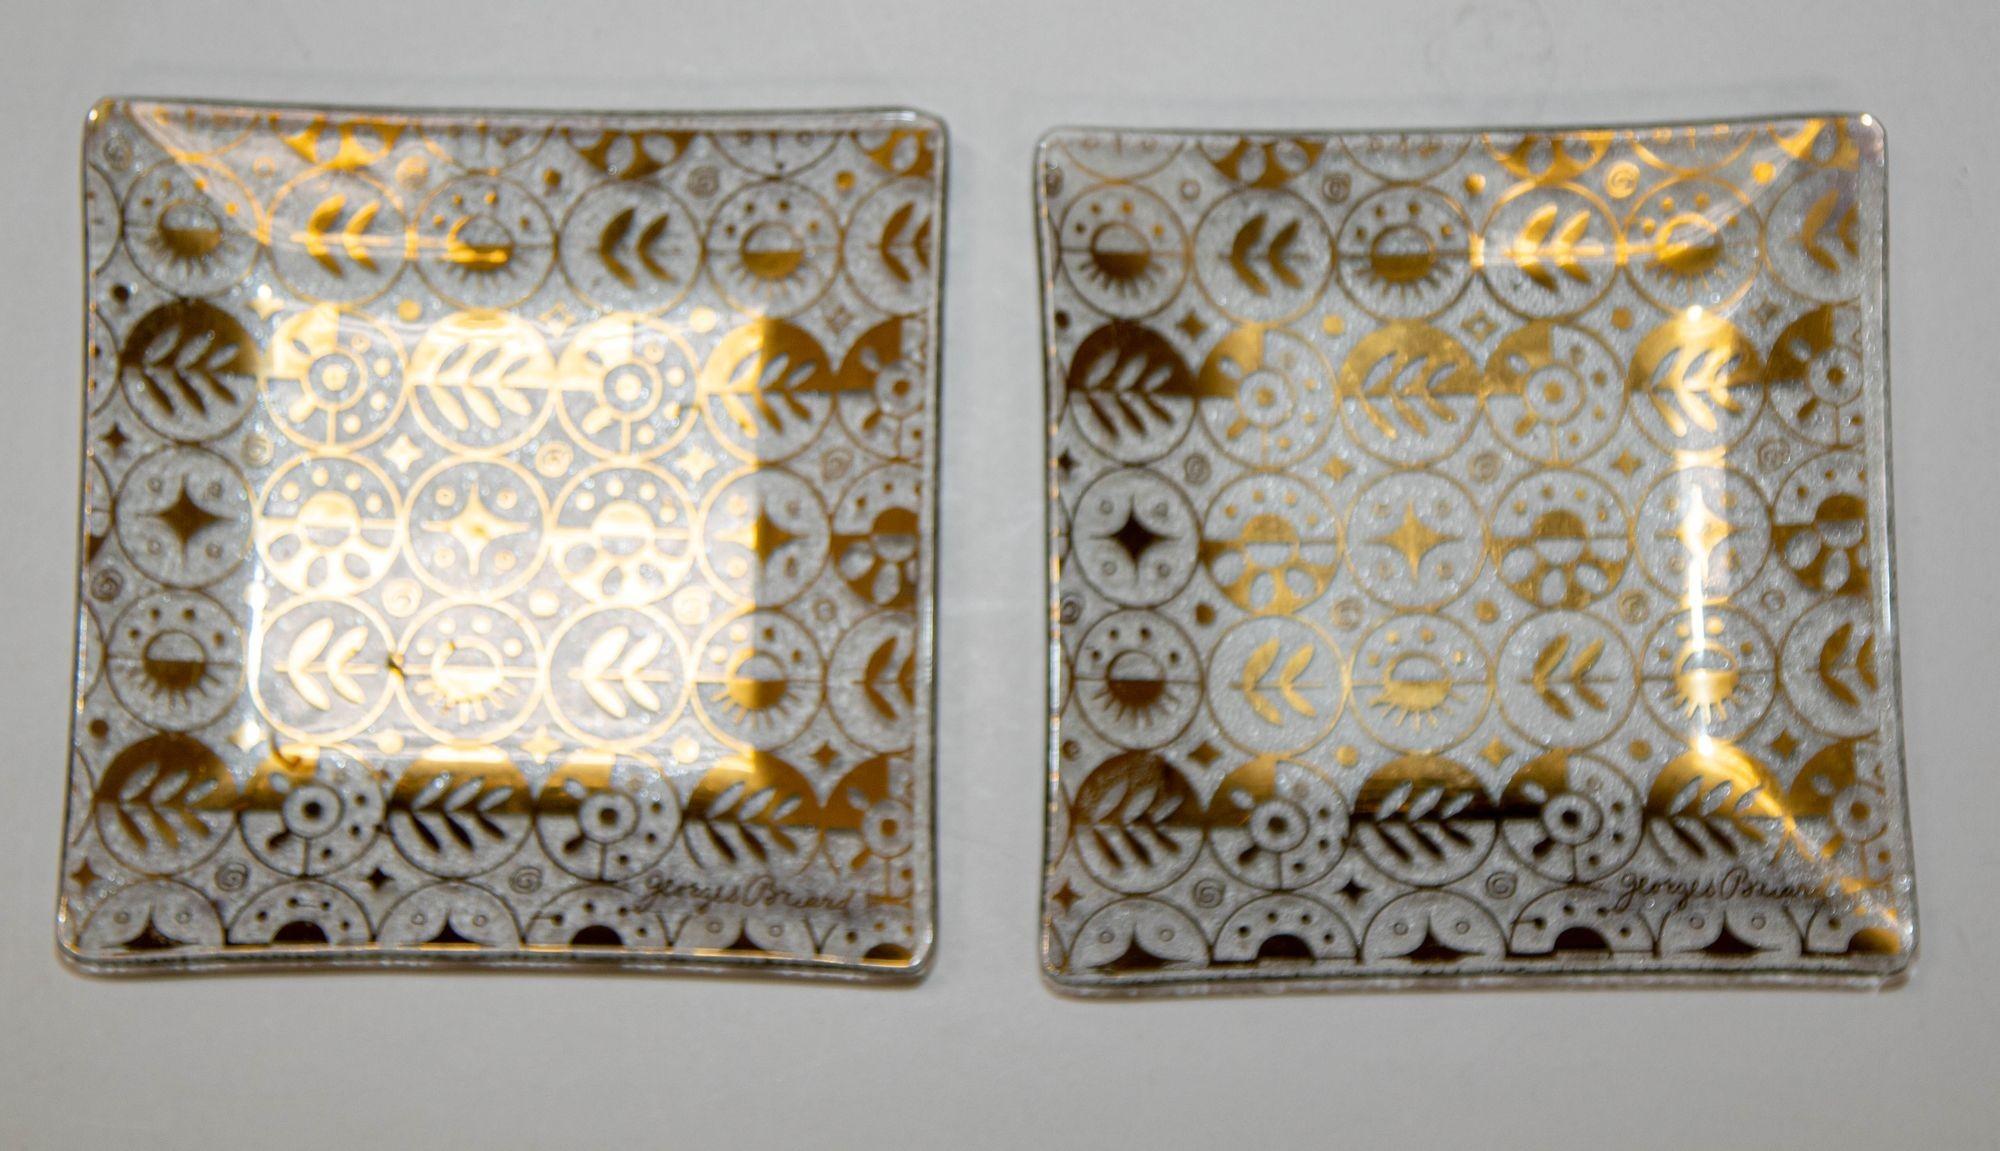 Vintage 1960's Mid Century Modern Georges Briard gold leaf glass appetizers plates set of 2.
The square shaped canape hors d'oeuvre plates with subtle flared flanged edges was made in the 1960's .
Beautiful signed Georges Briard 